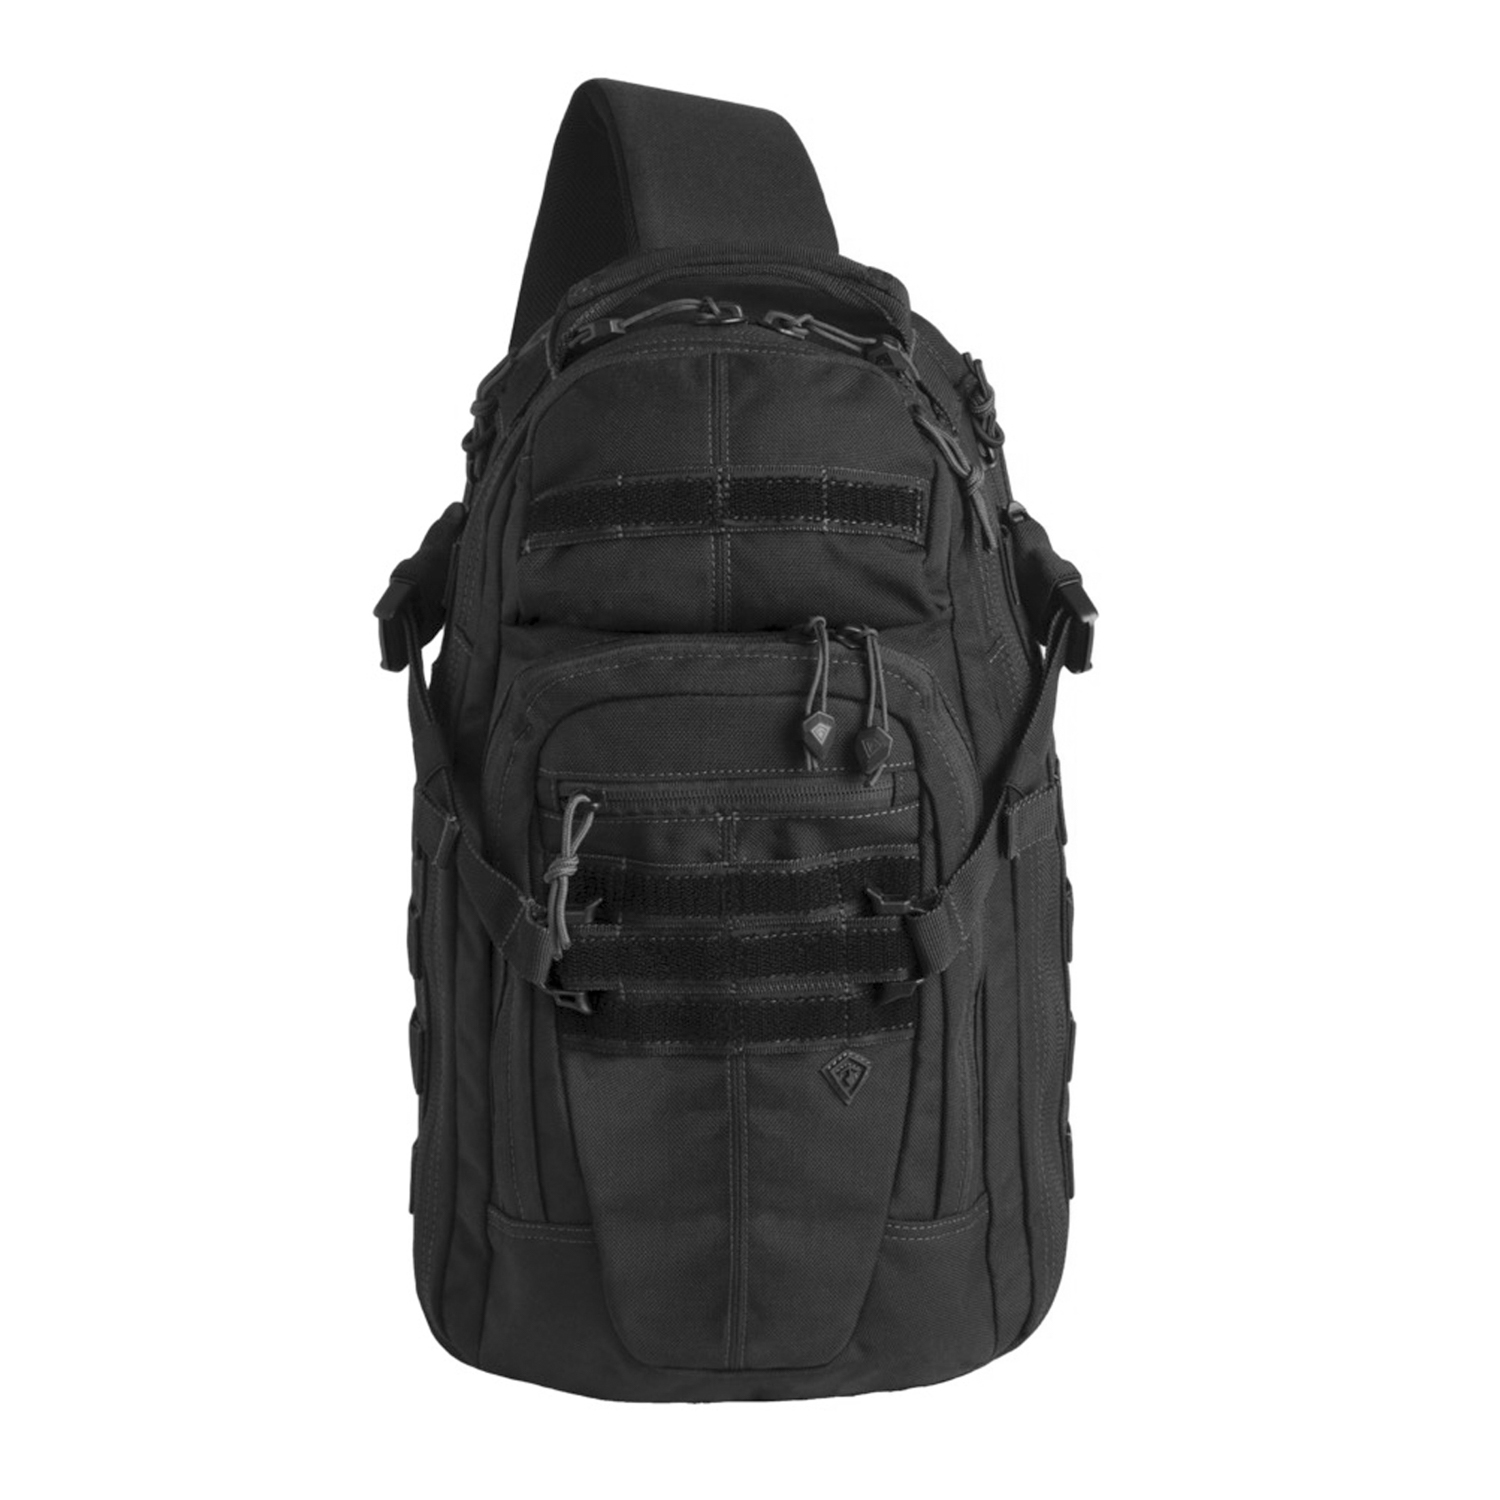 FIRST TACTICAL CROSSHATCH SLING PACK